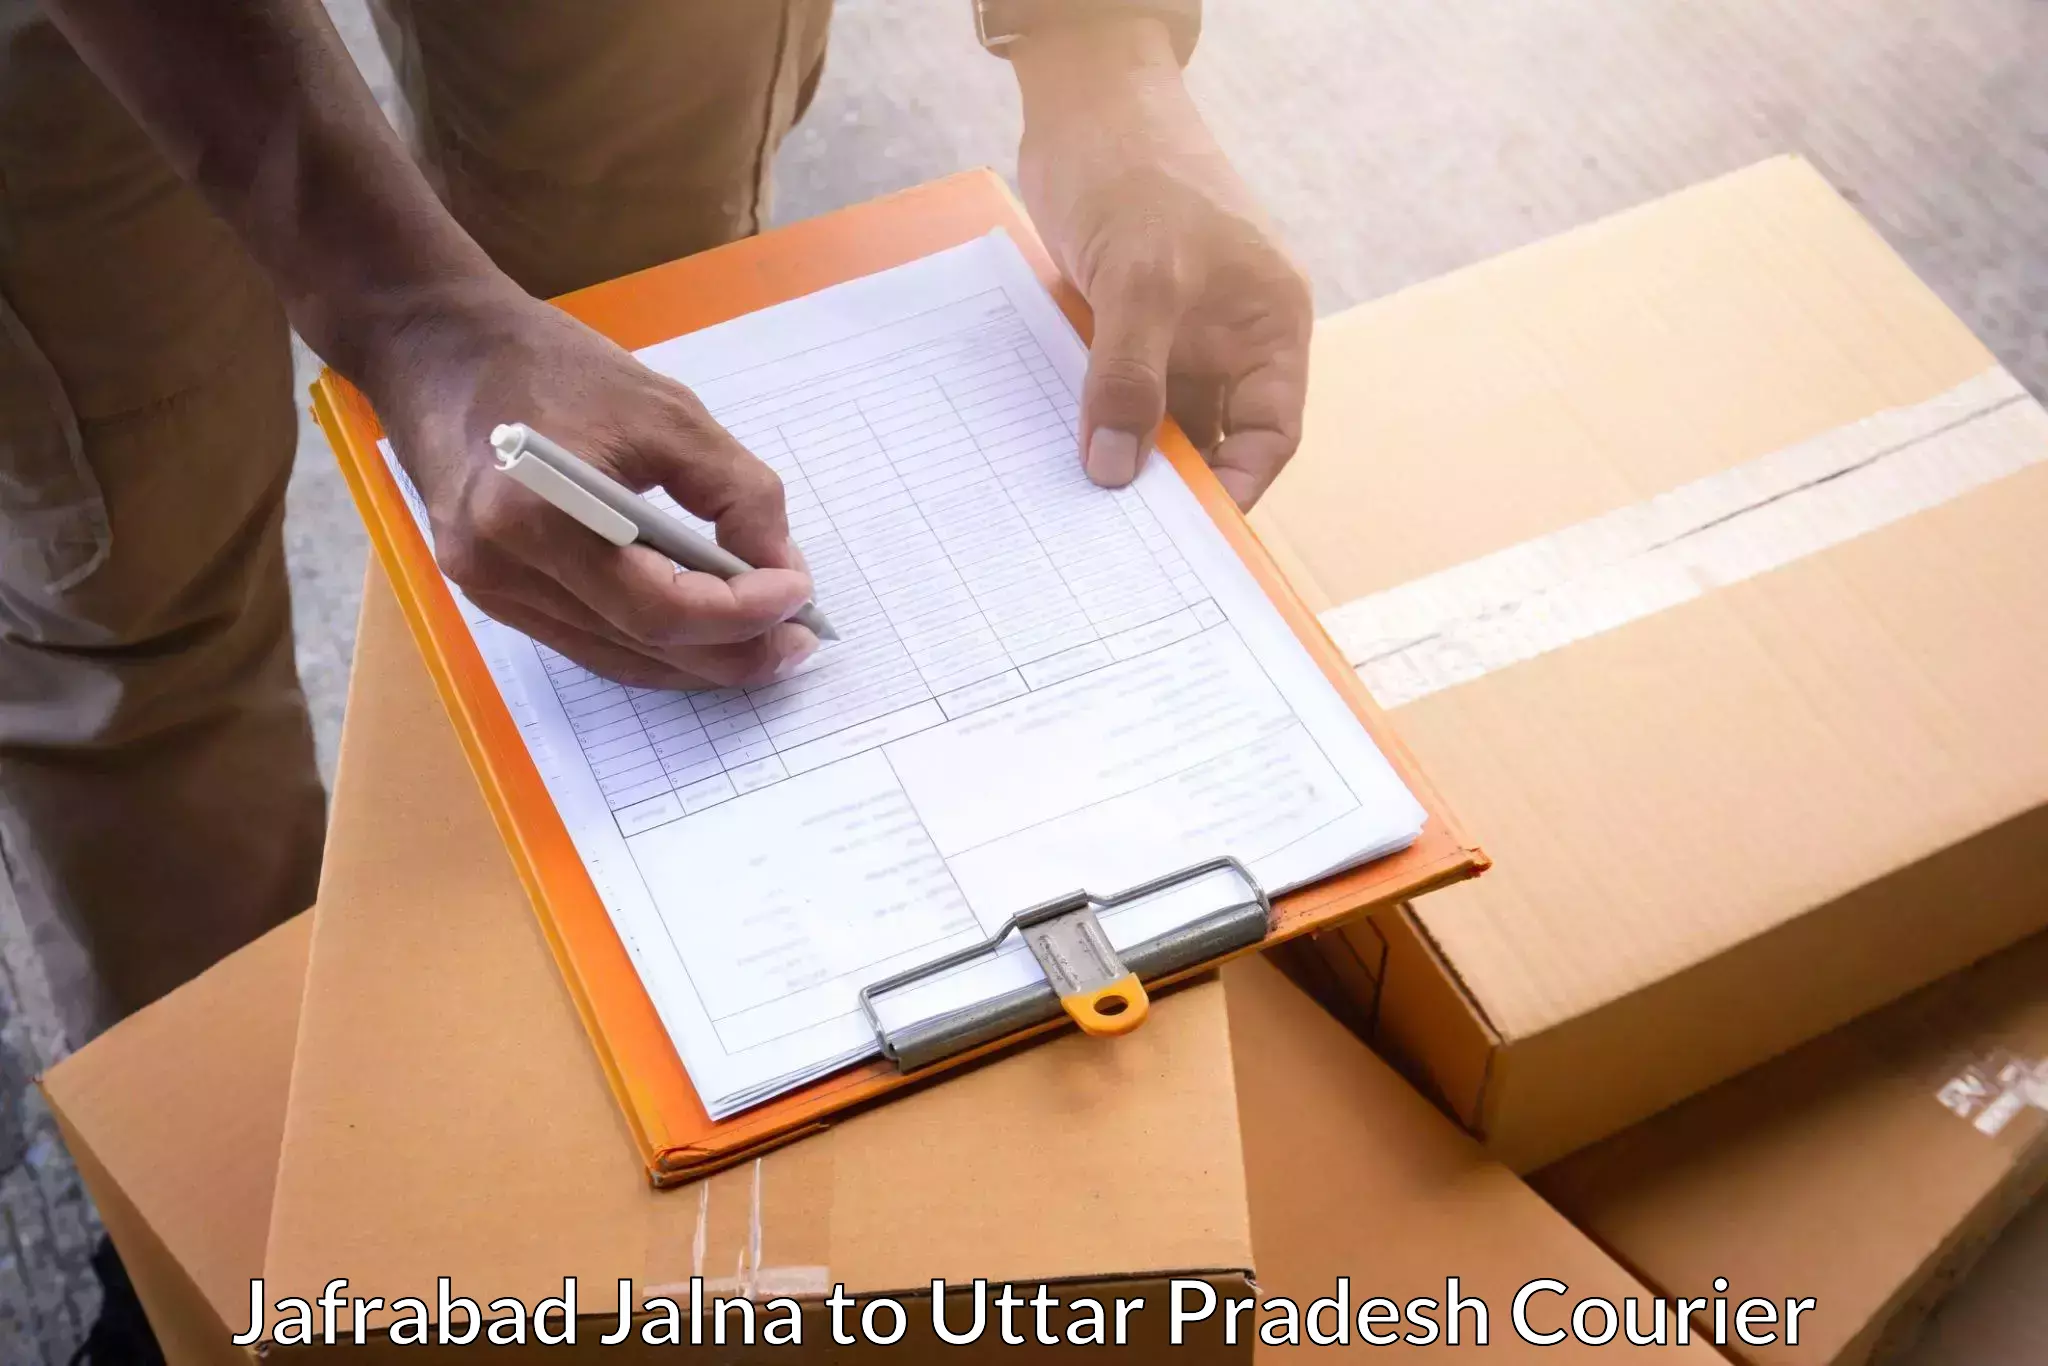 Courier tracking online Jafrabad Jalna to Rampur Maniharan